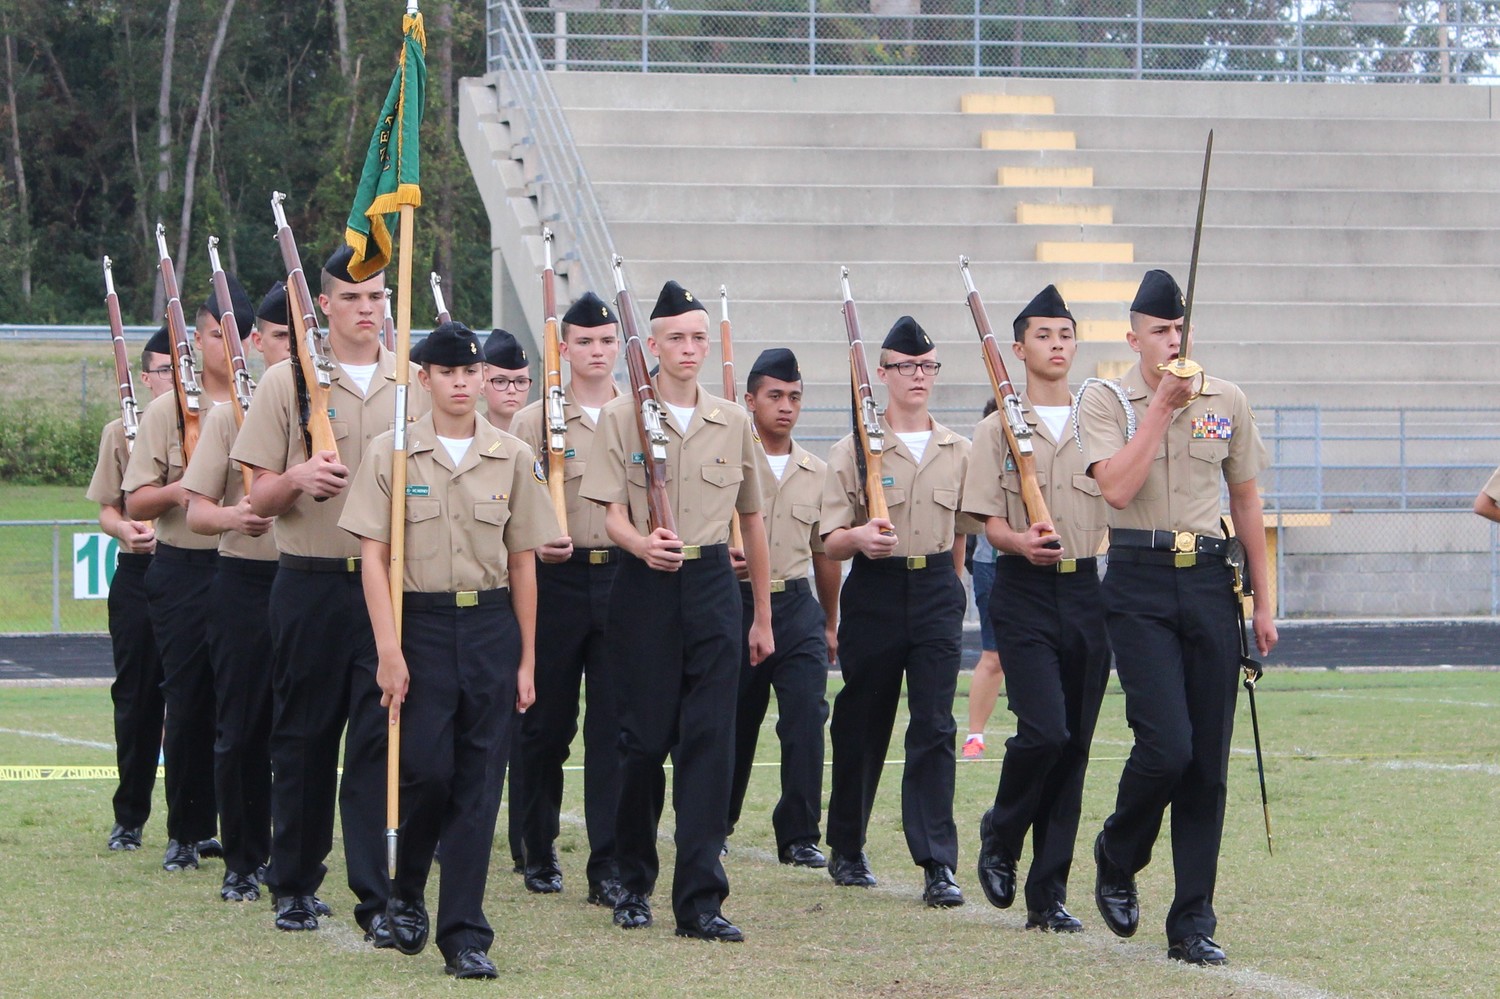 Cadet Peyton Gustafson leads the Nease NJROTC Armed Basic Drill Team to a first-place finish at the Ed White drill meet on Sept. 30.